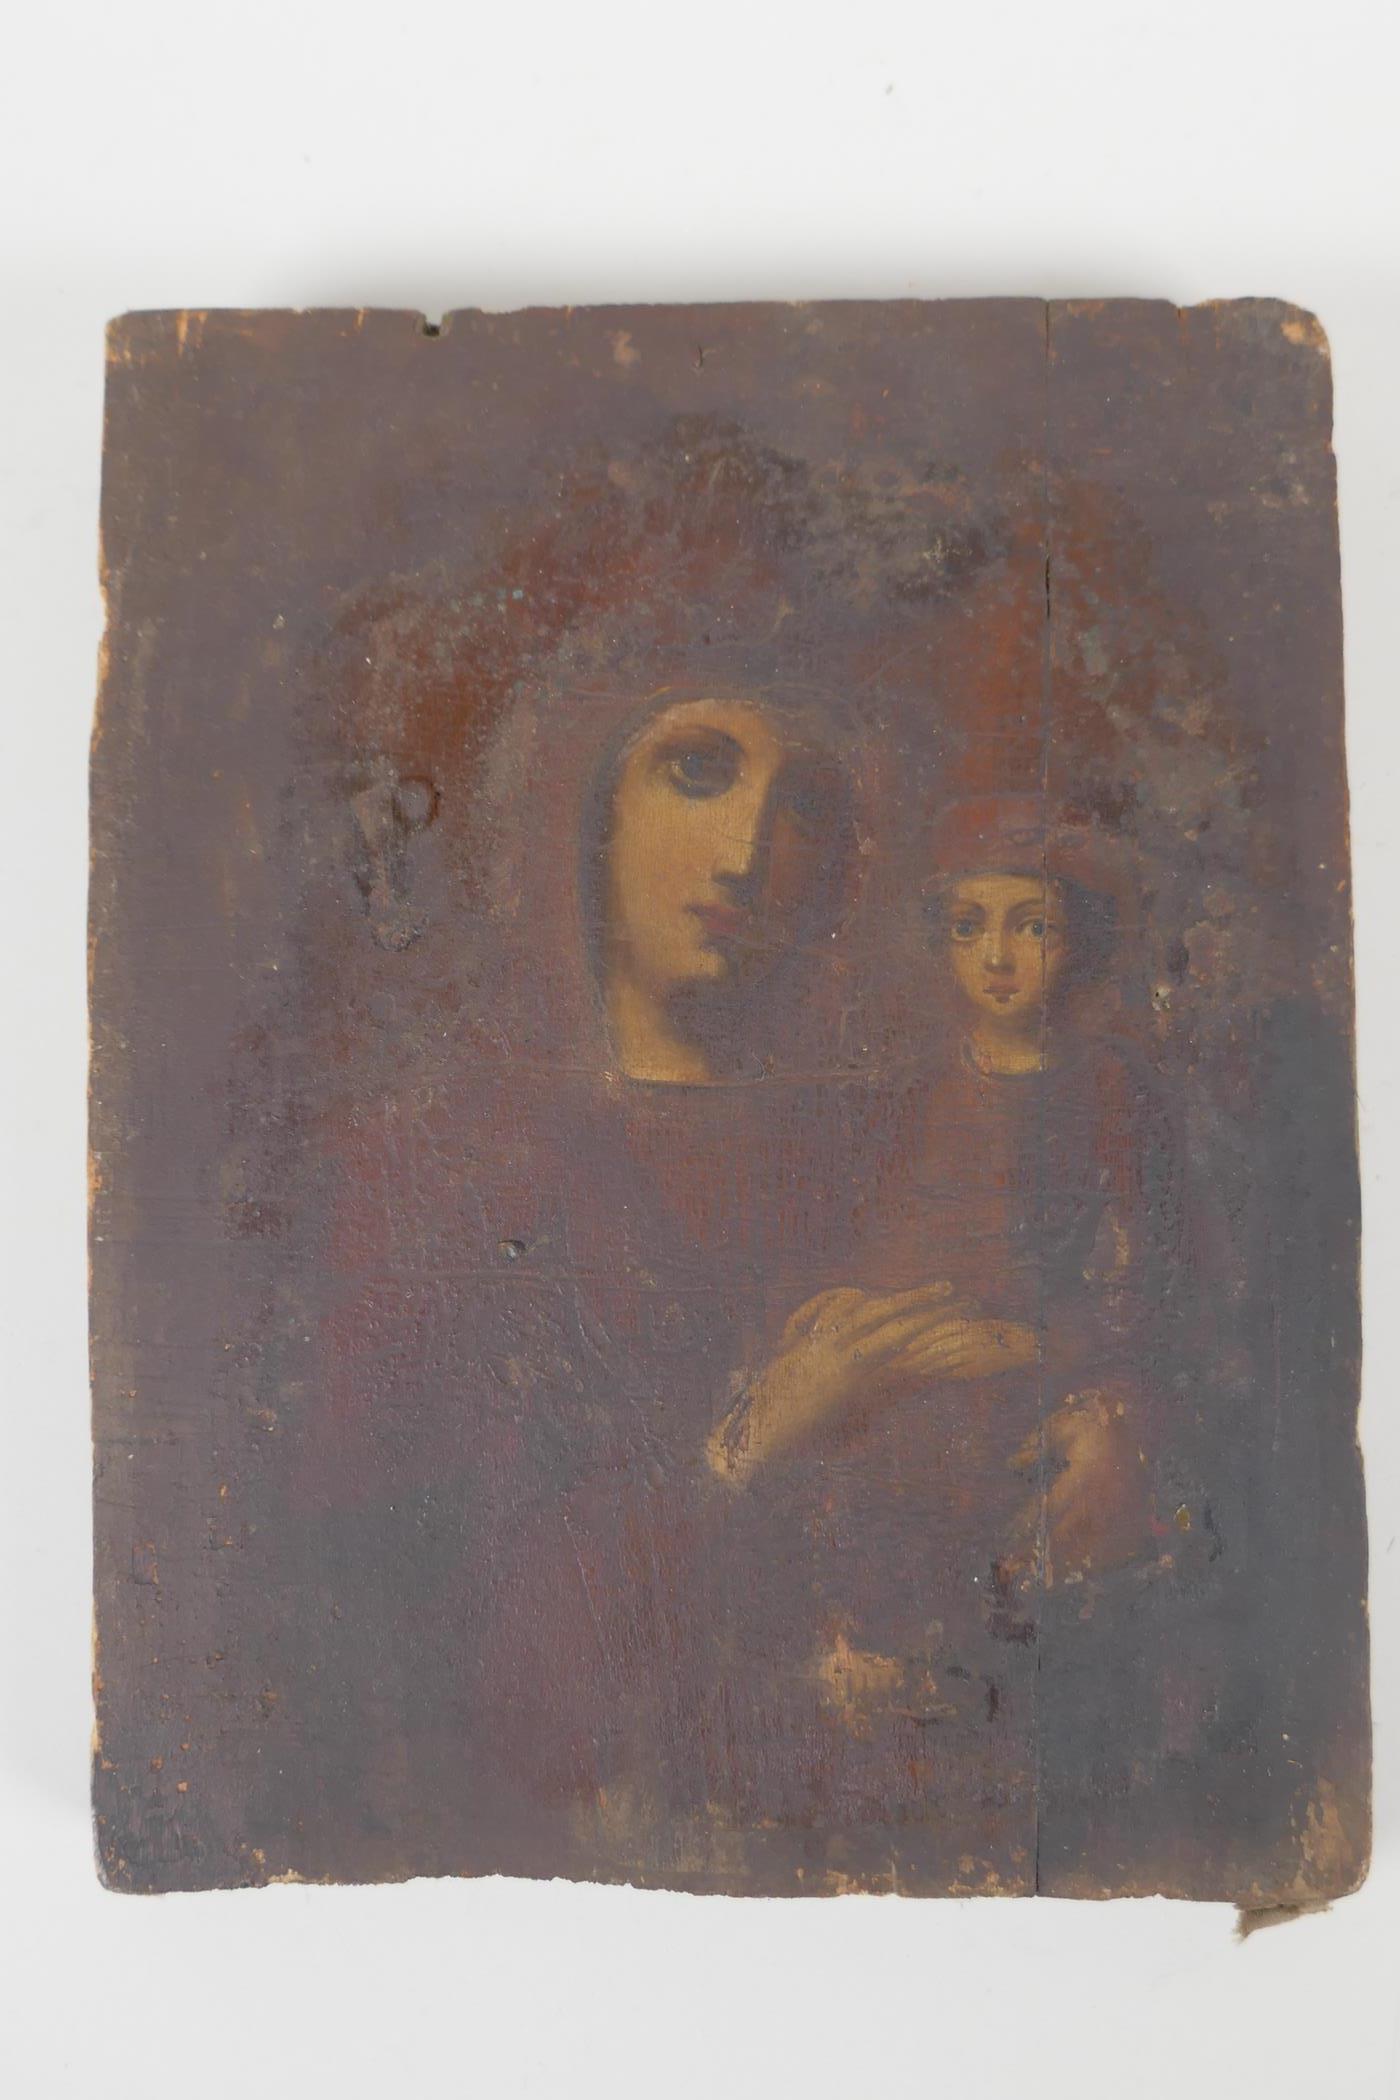 Portrait of the Madonna and Child, antique oil on panel, 8" x 7" - Image 2 of 3